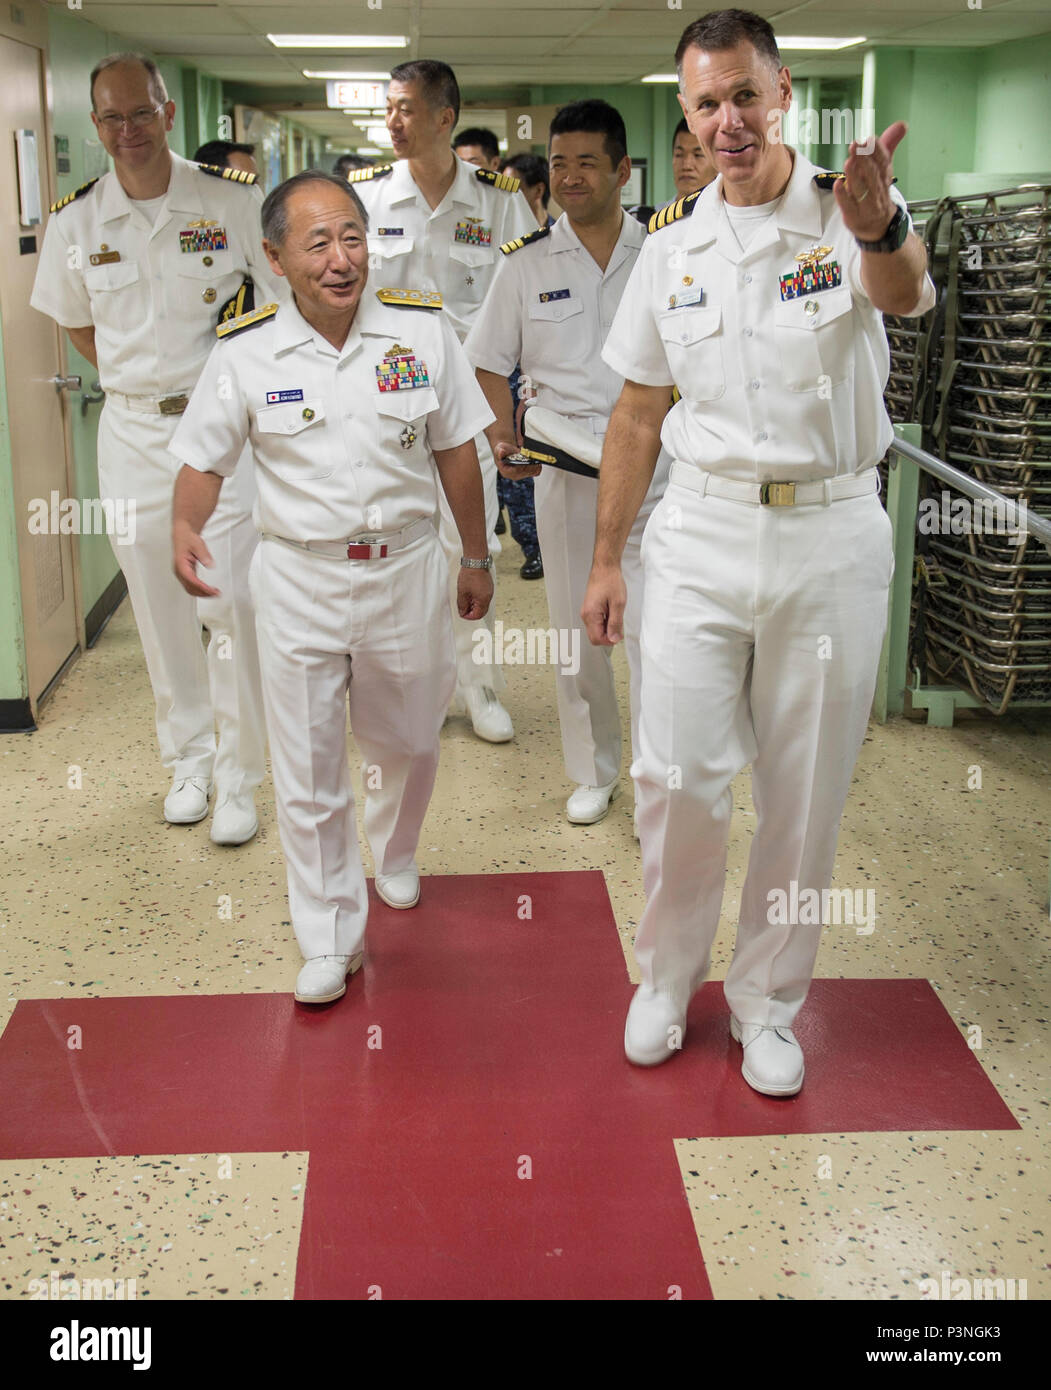 160717-N-QW941-239 DA NANG, Vietnam (July 17, 2016) U.S. Navy Capt. Peter Roberts (right), commanding officer, Medical Treatment Facility, USNS Mercy (T-AH 19), guides Admiral Katsutoshi Kawano (left), chief of staff of the Joint Staff, Japanese Self-Defense Force, during a tour of the ship. Kawano visited Mercy and JS Shimokita (LST-4002), which are both in Da Nang for Pacific Partnership 2016. Partner nations are working side-by-side with local military and non-government organizations to conduct cooperative health engagements, community relation events and subject matter expert exchanges to Stock Photo